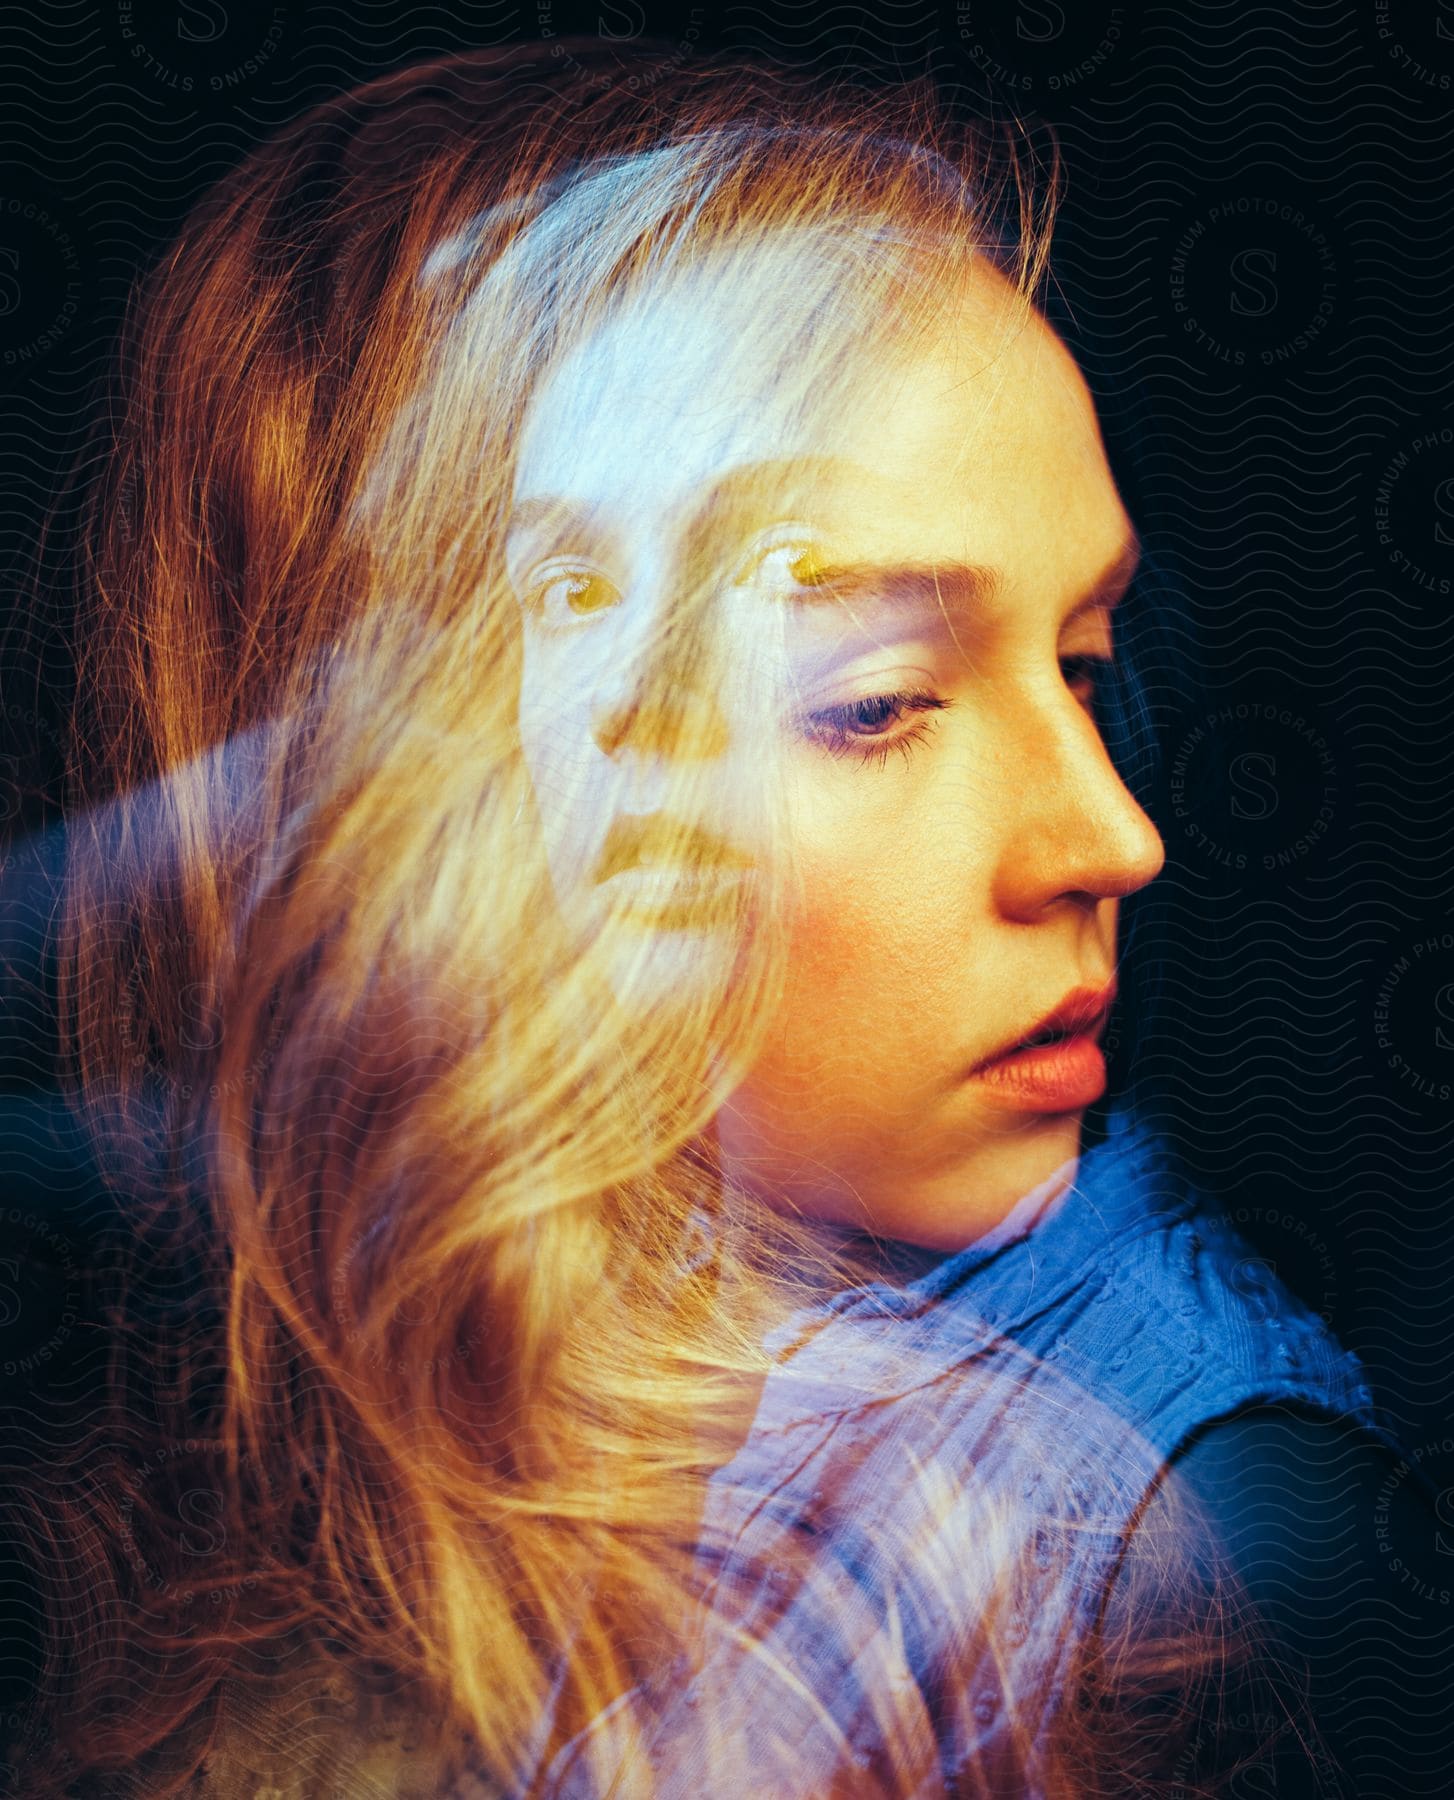 Blonde girl captured in a multiple exposure photograph